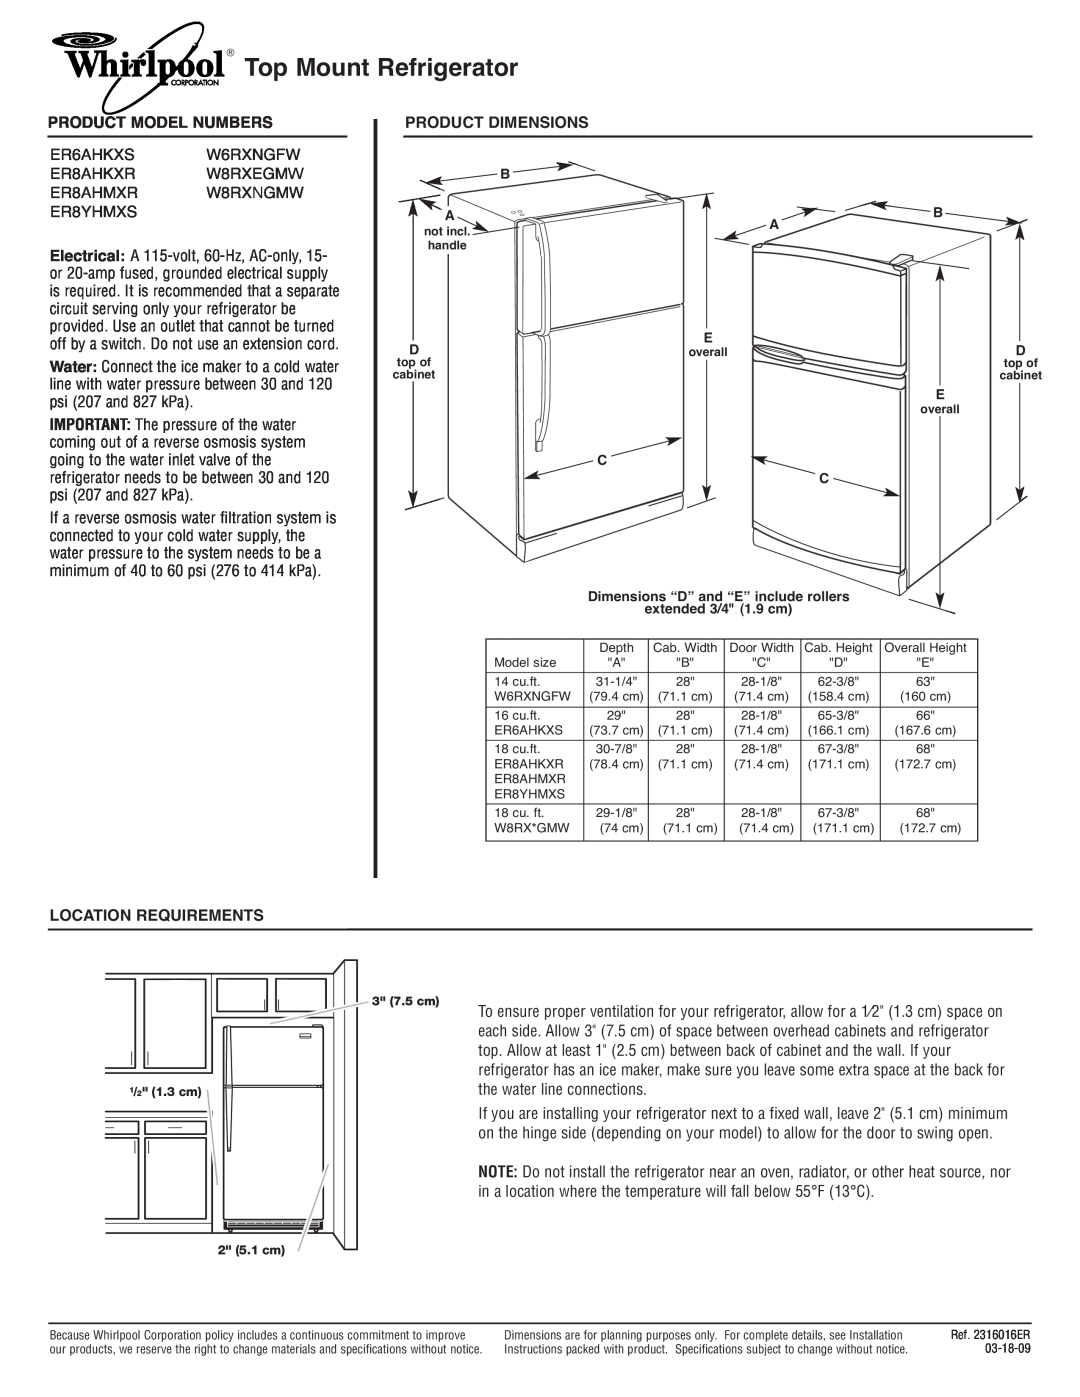 Whirlpool W8RXEGMW dimensions Top Mount Refrigerator, Product Model Numbers, Product Dimensions, Location Requirements 